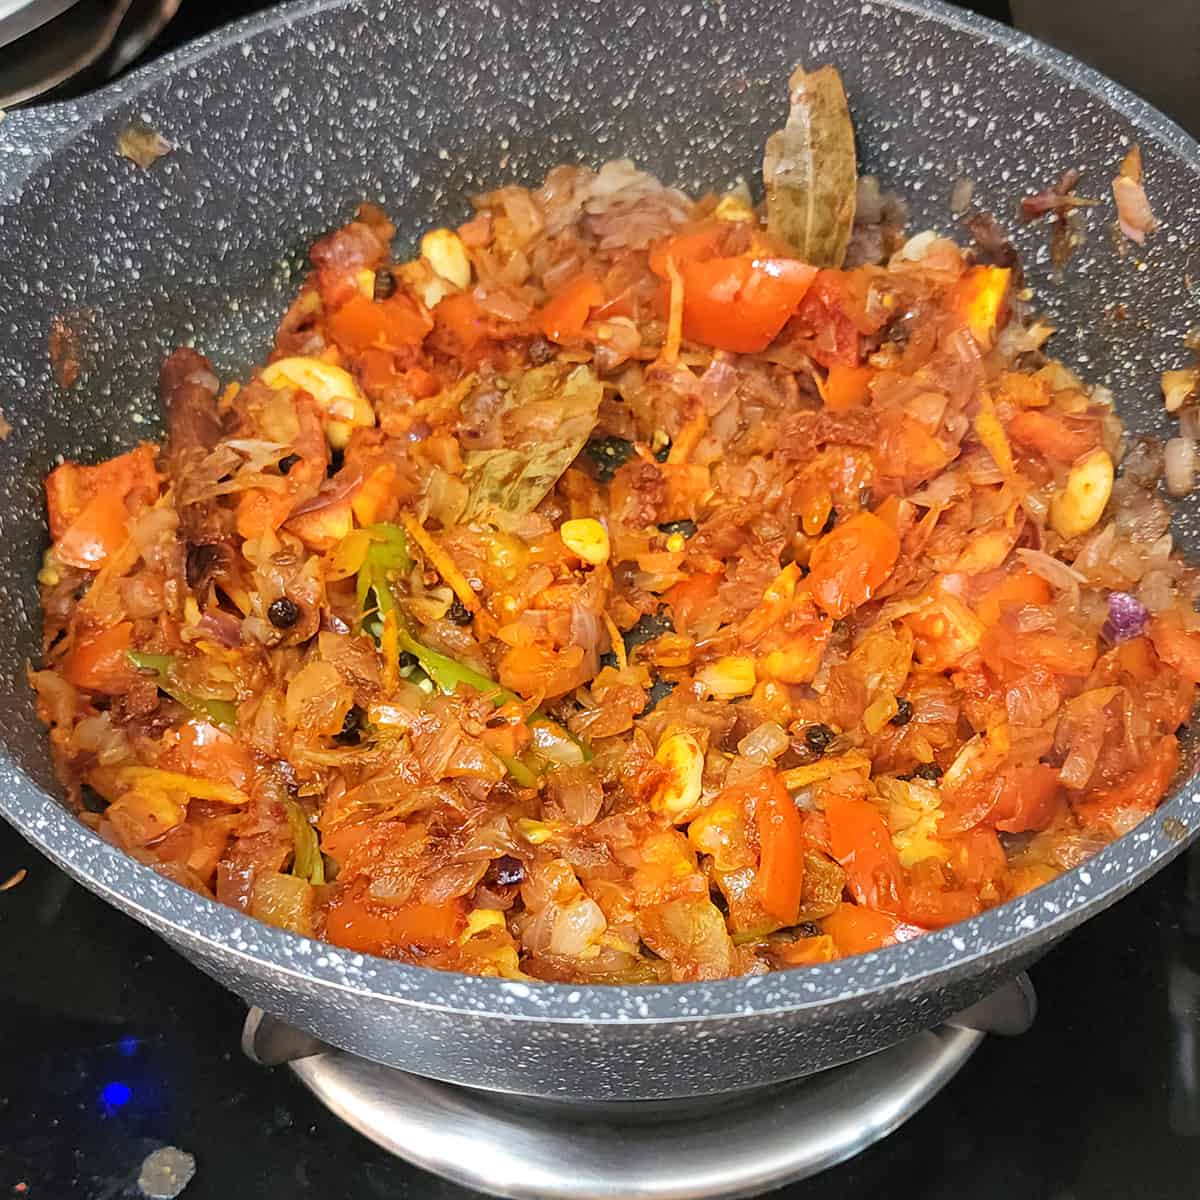 Cooked onions and tomatoes along with whole spices and spice powders in a nonstick pan.